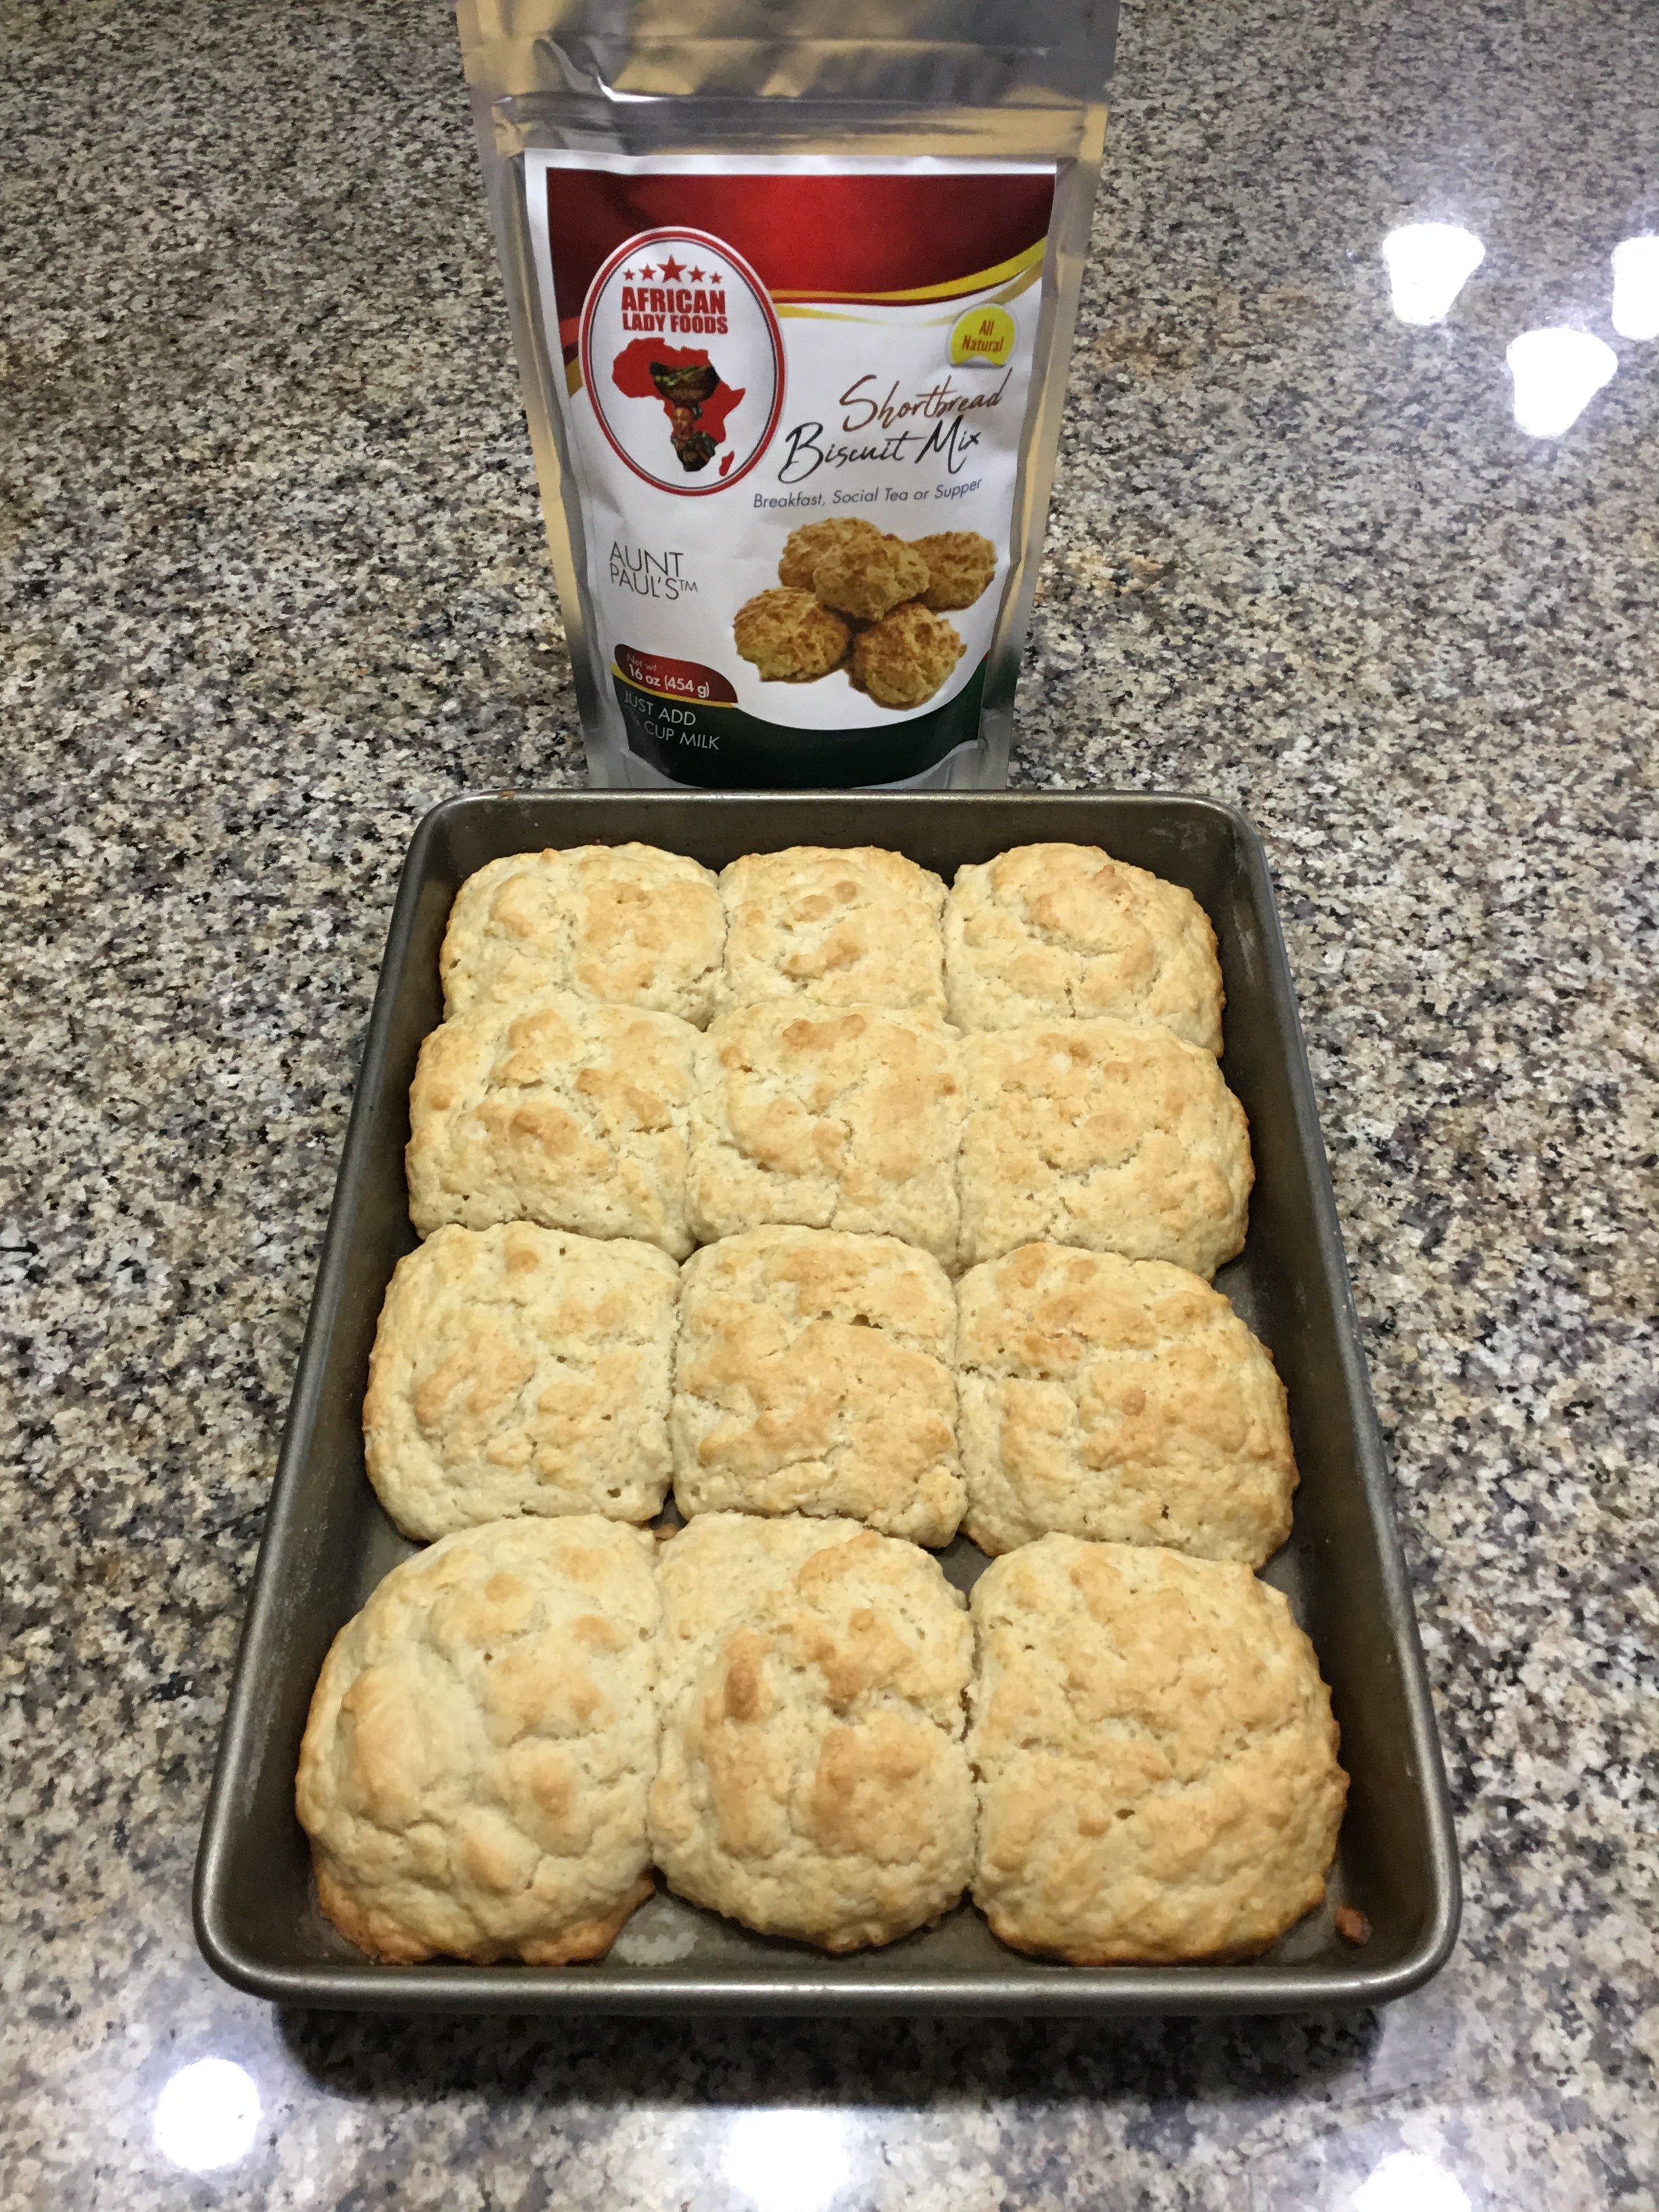 Shortbread Biscuits made from the Shortbread Biscuit Mix